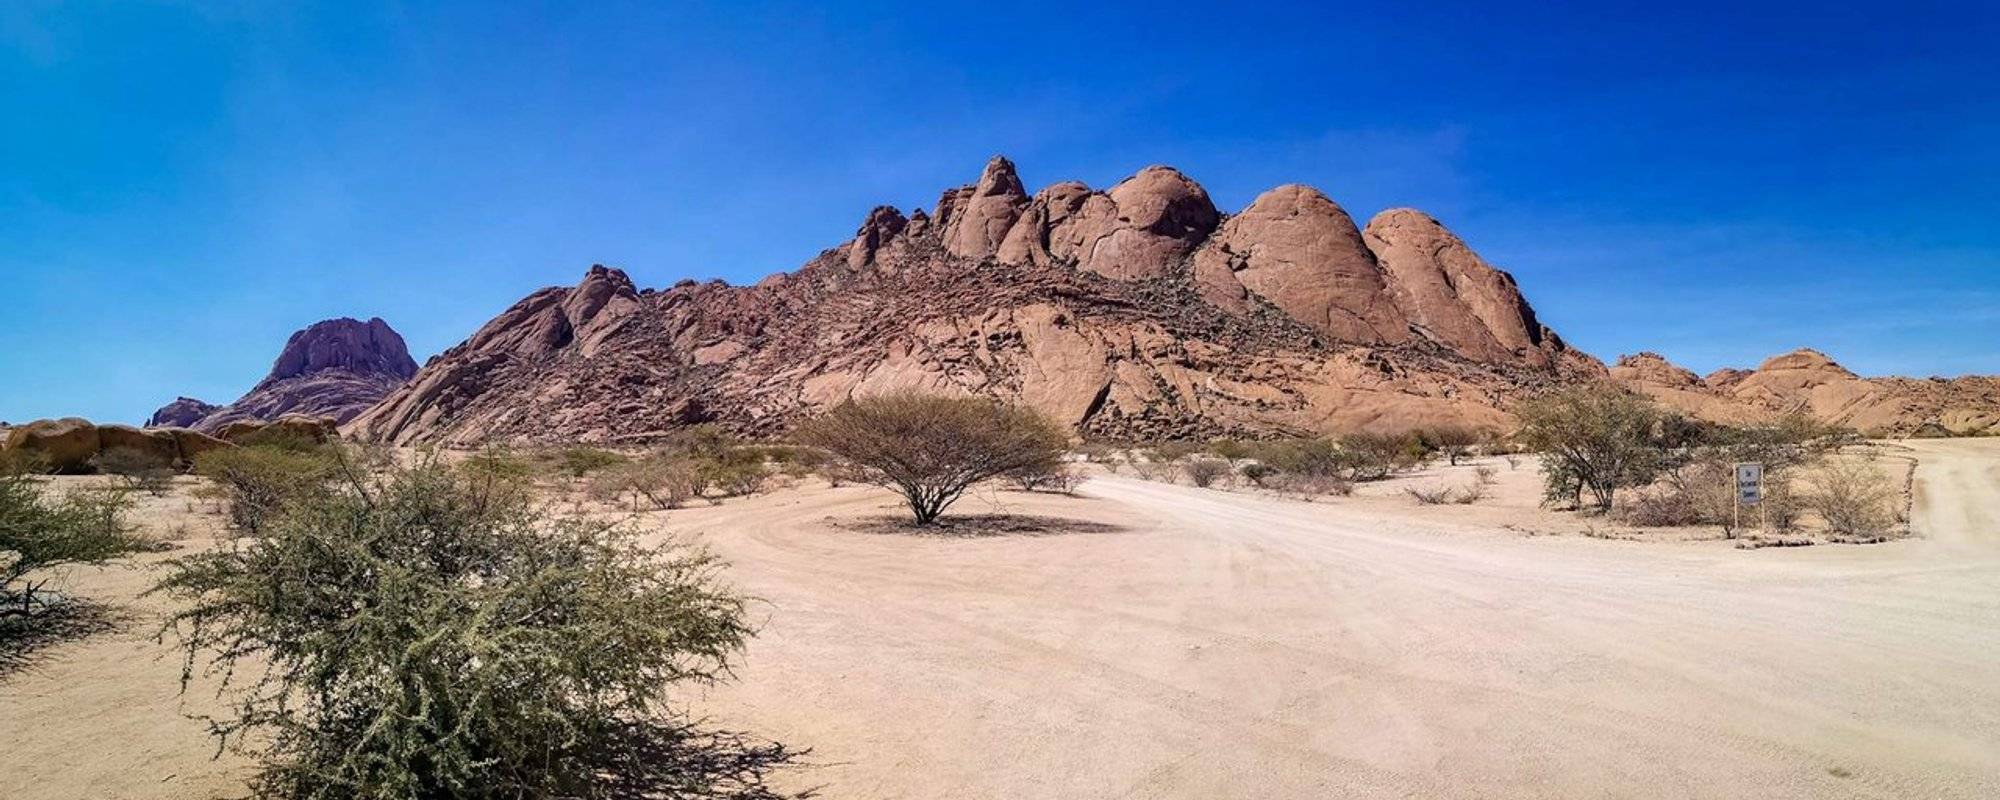 We found 2000+ year old paintings at the Spitzkoppe mountains Namibia - African Adventure.